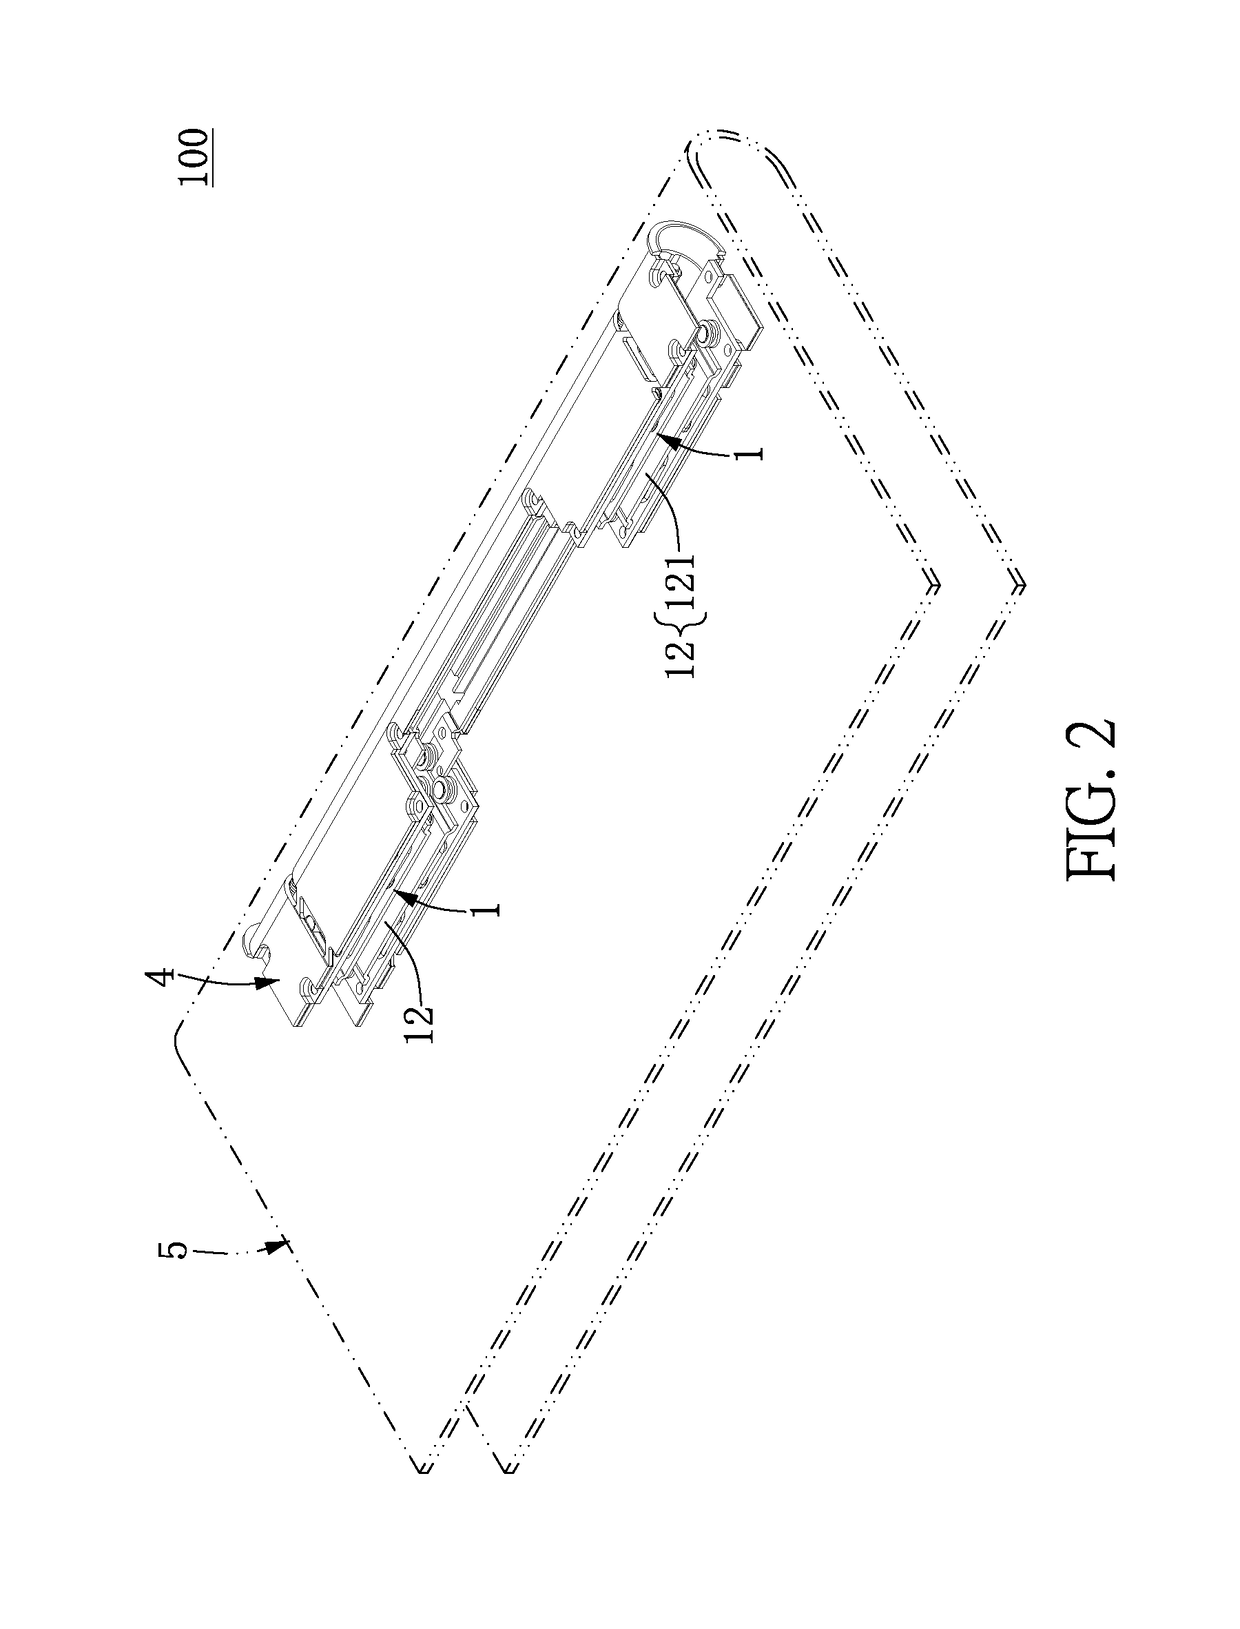 Bendable display apparatus and supporting device